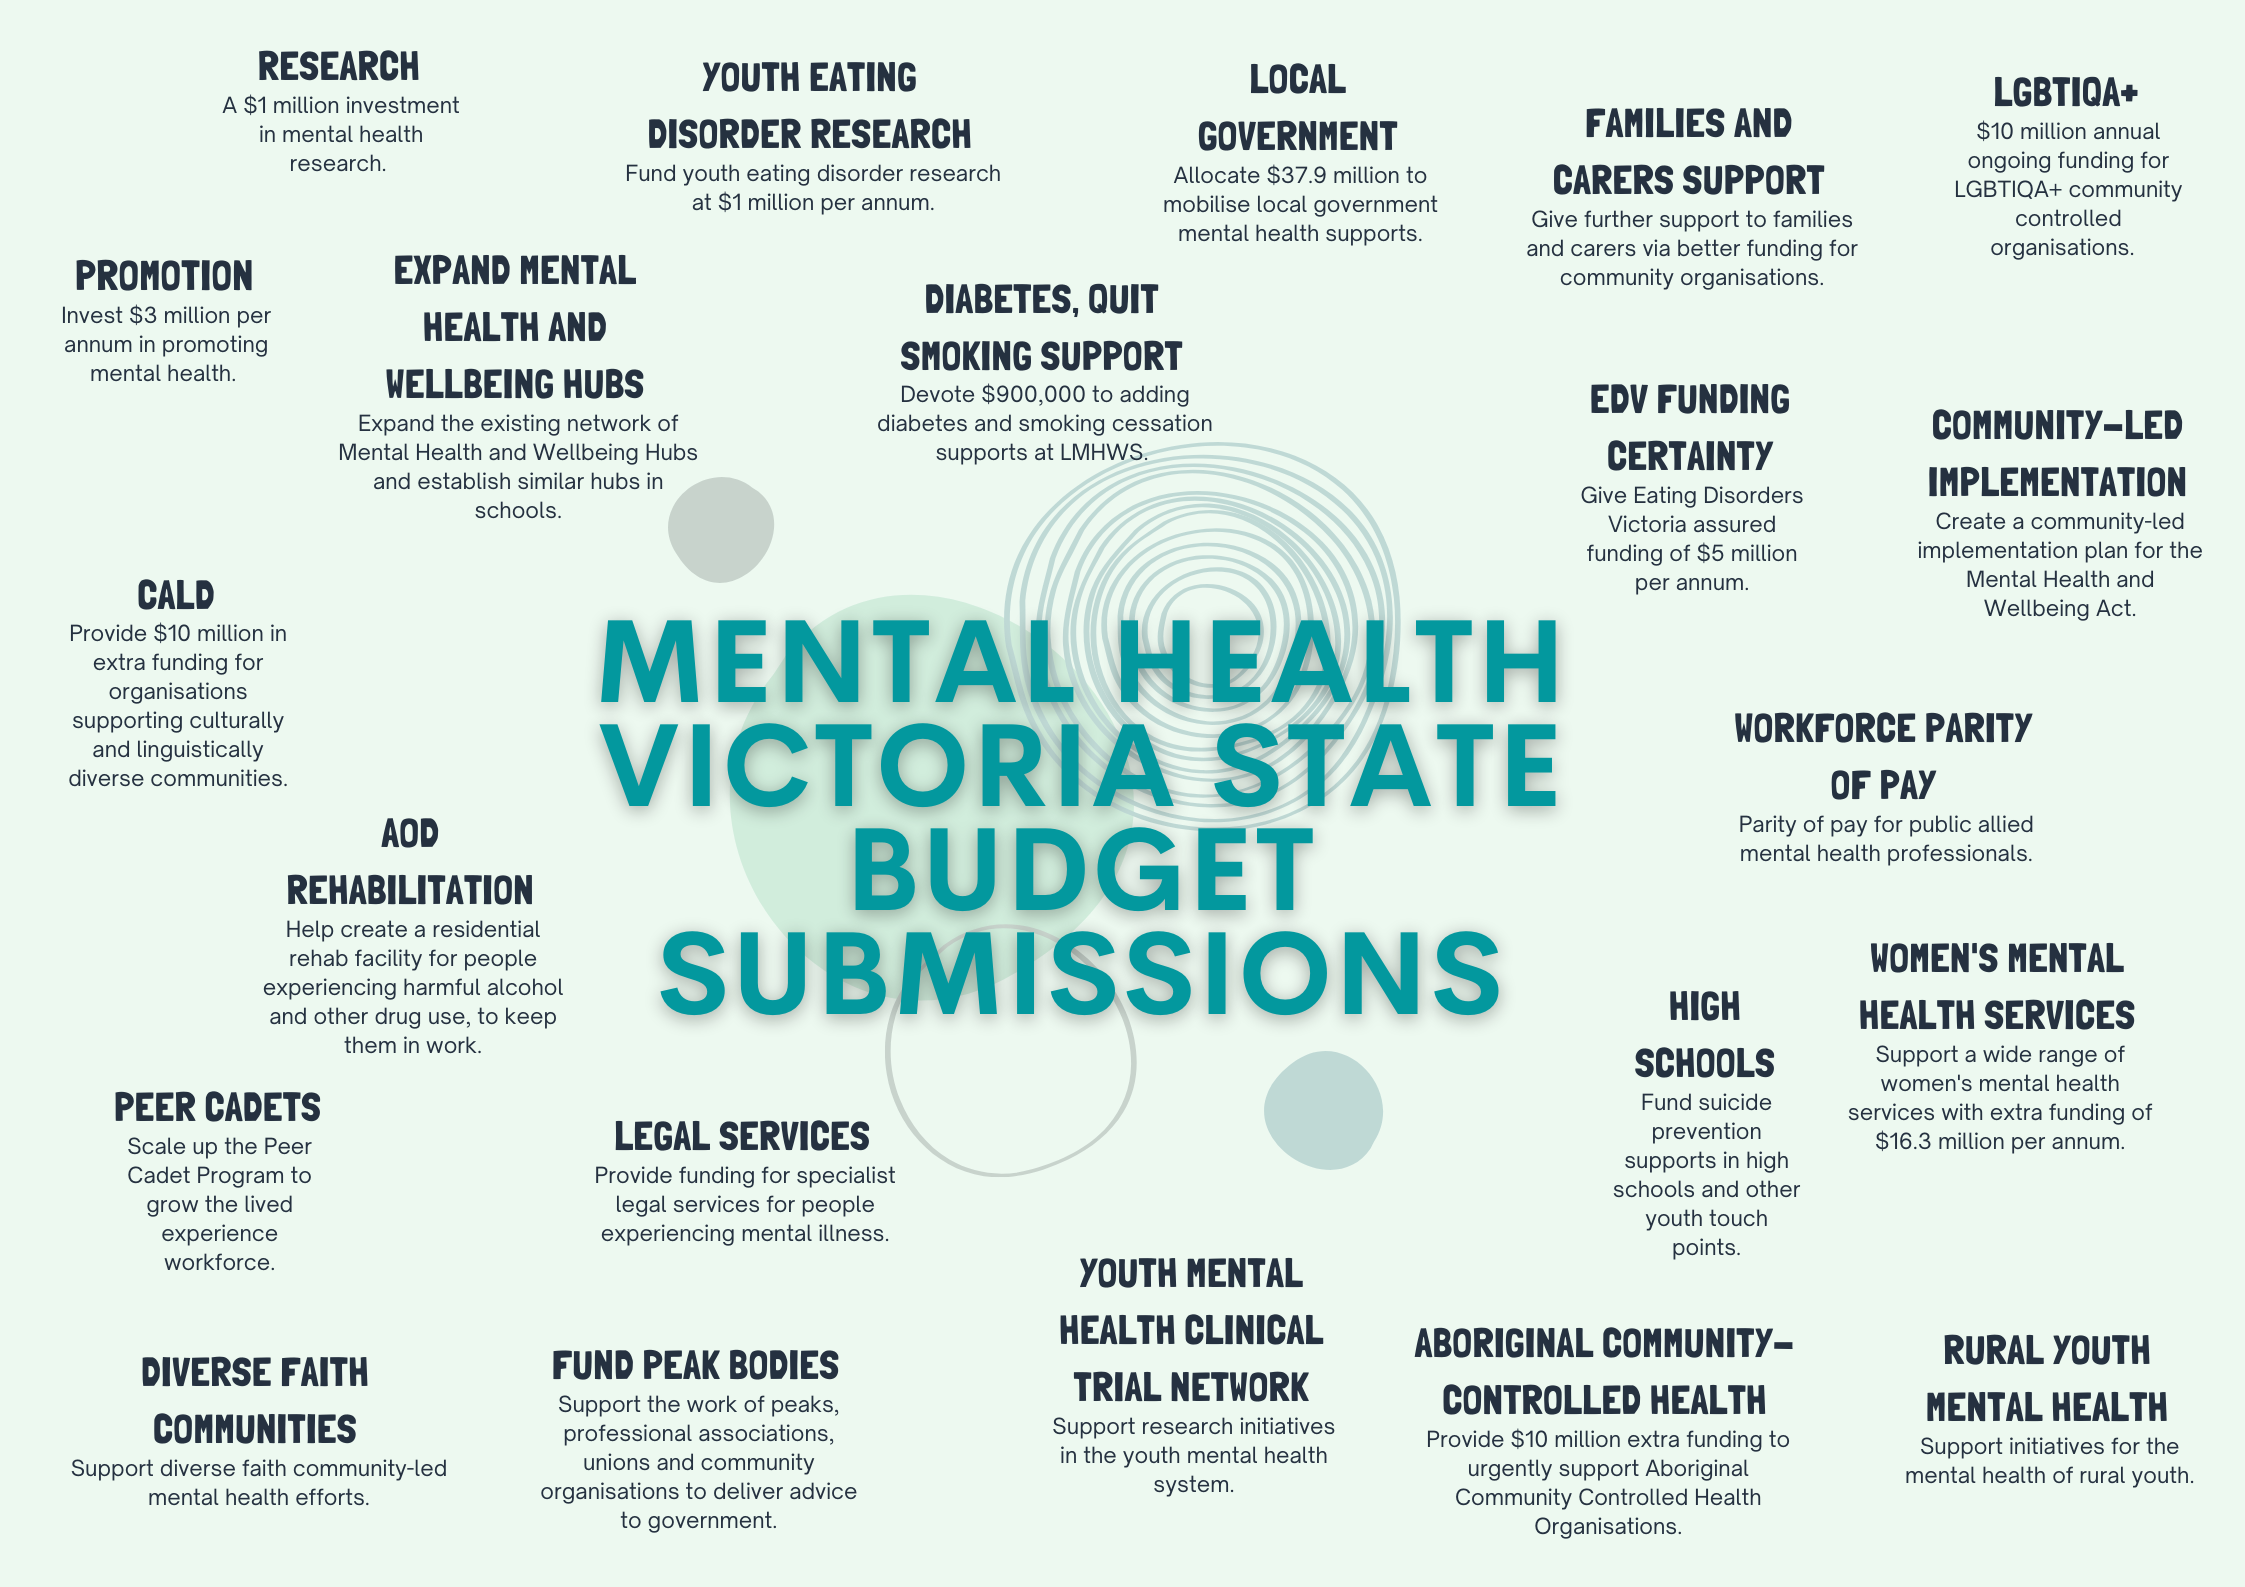 Against a light orange background, Mental Health Victoria's State Budget submissions